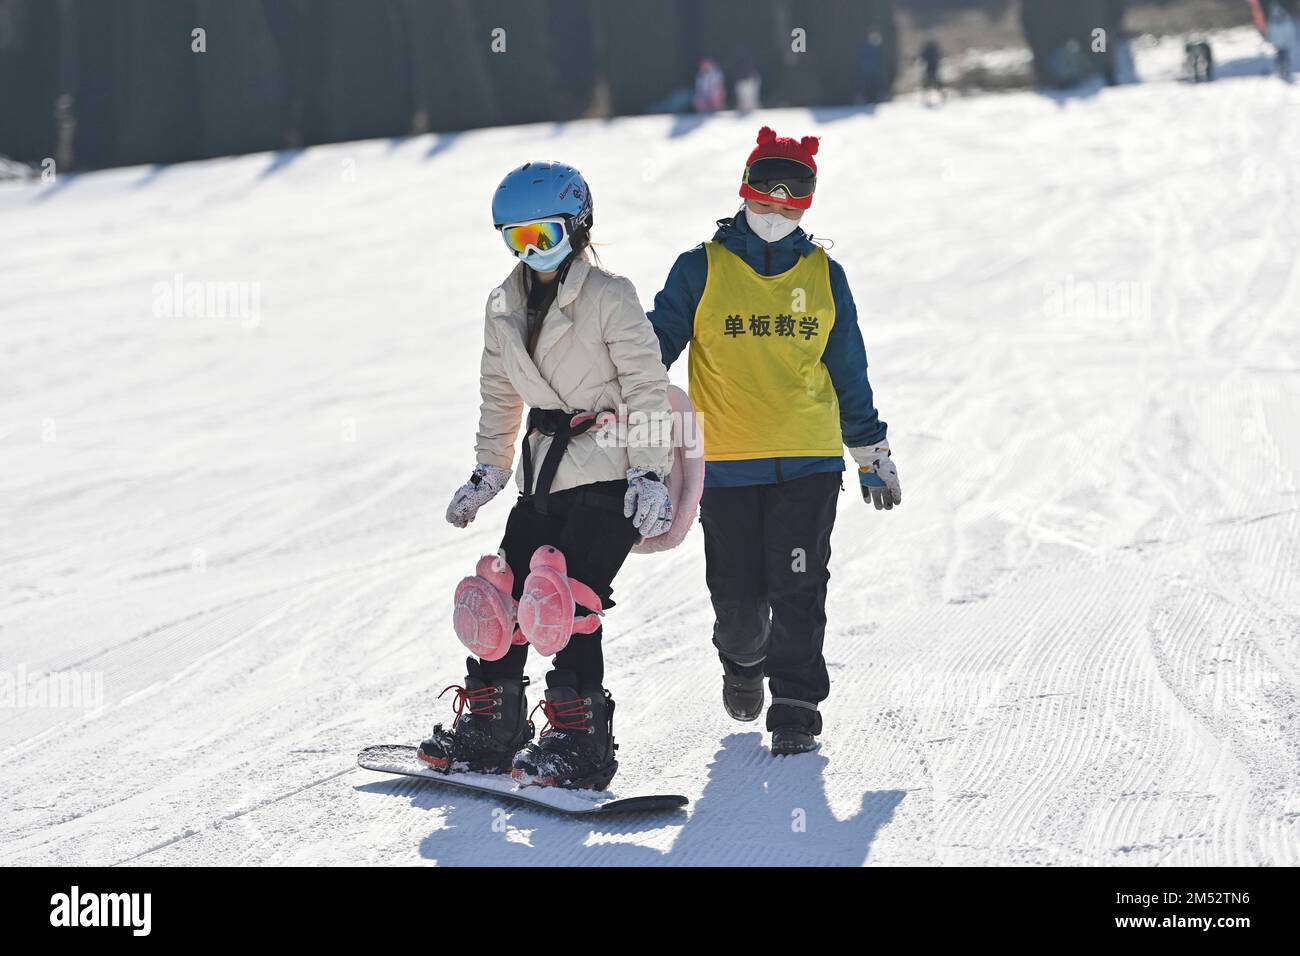 WEIFANG, CHINA - DECEMBER 25, 2022 - Tourists practice skiing under the guidance of an instructor at a ski resort in Weifang, East China's Shandong pr Stock Photo